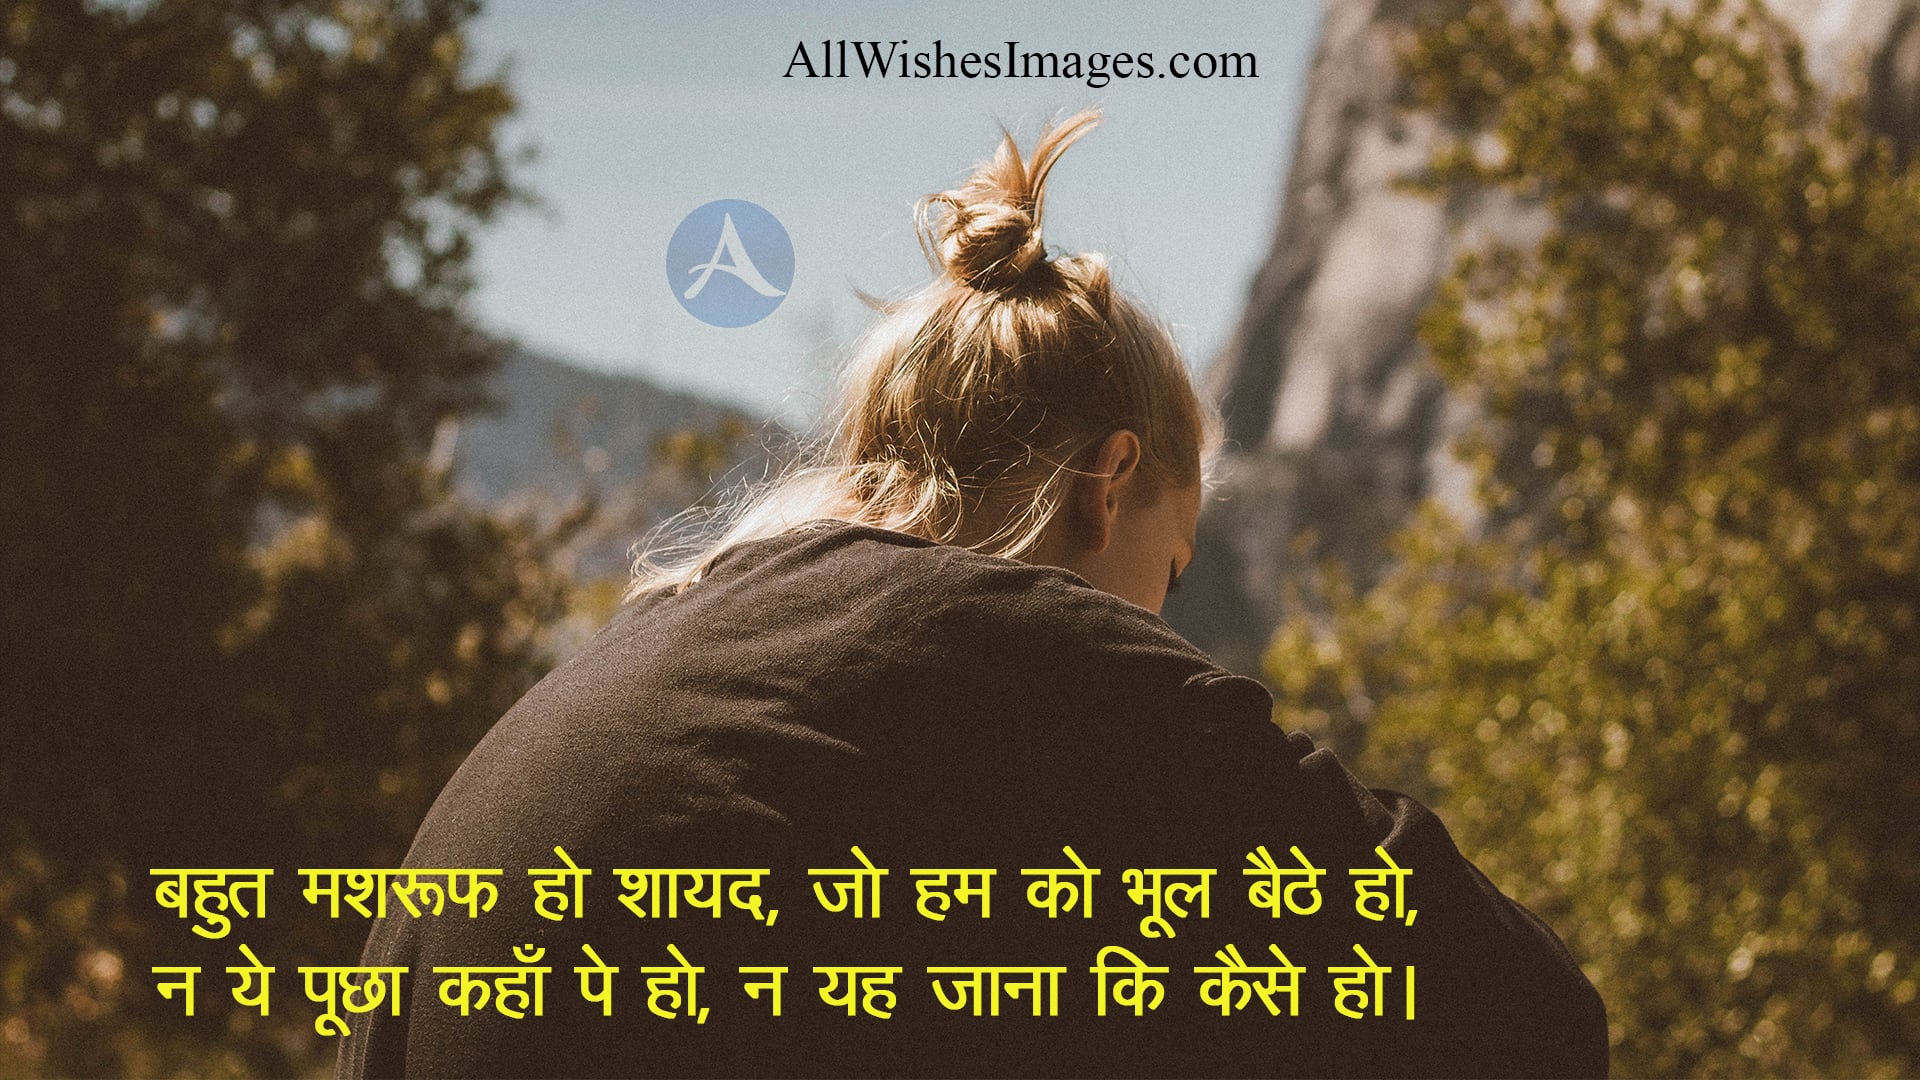 Sad Image With Shayari For Facebook - All Wishes Images - Images for  WhatsApp